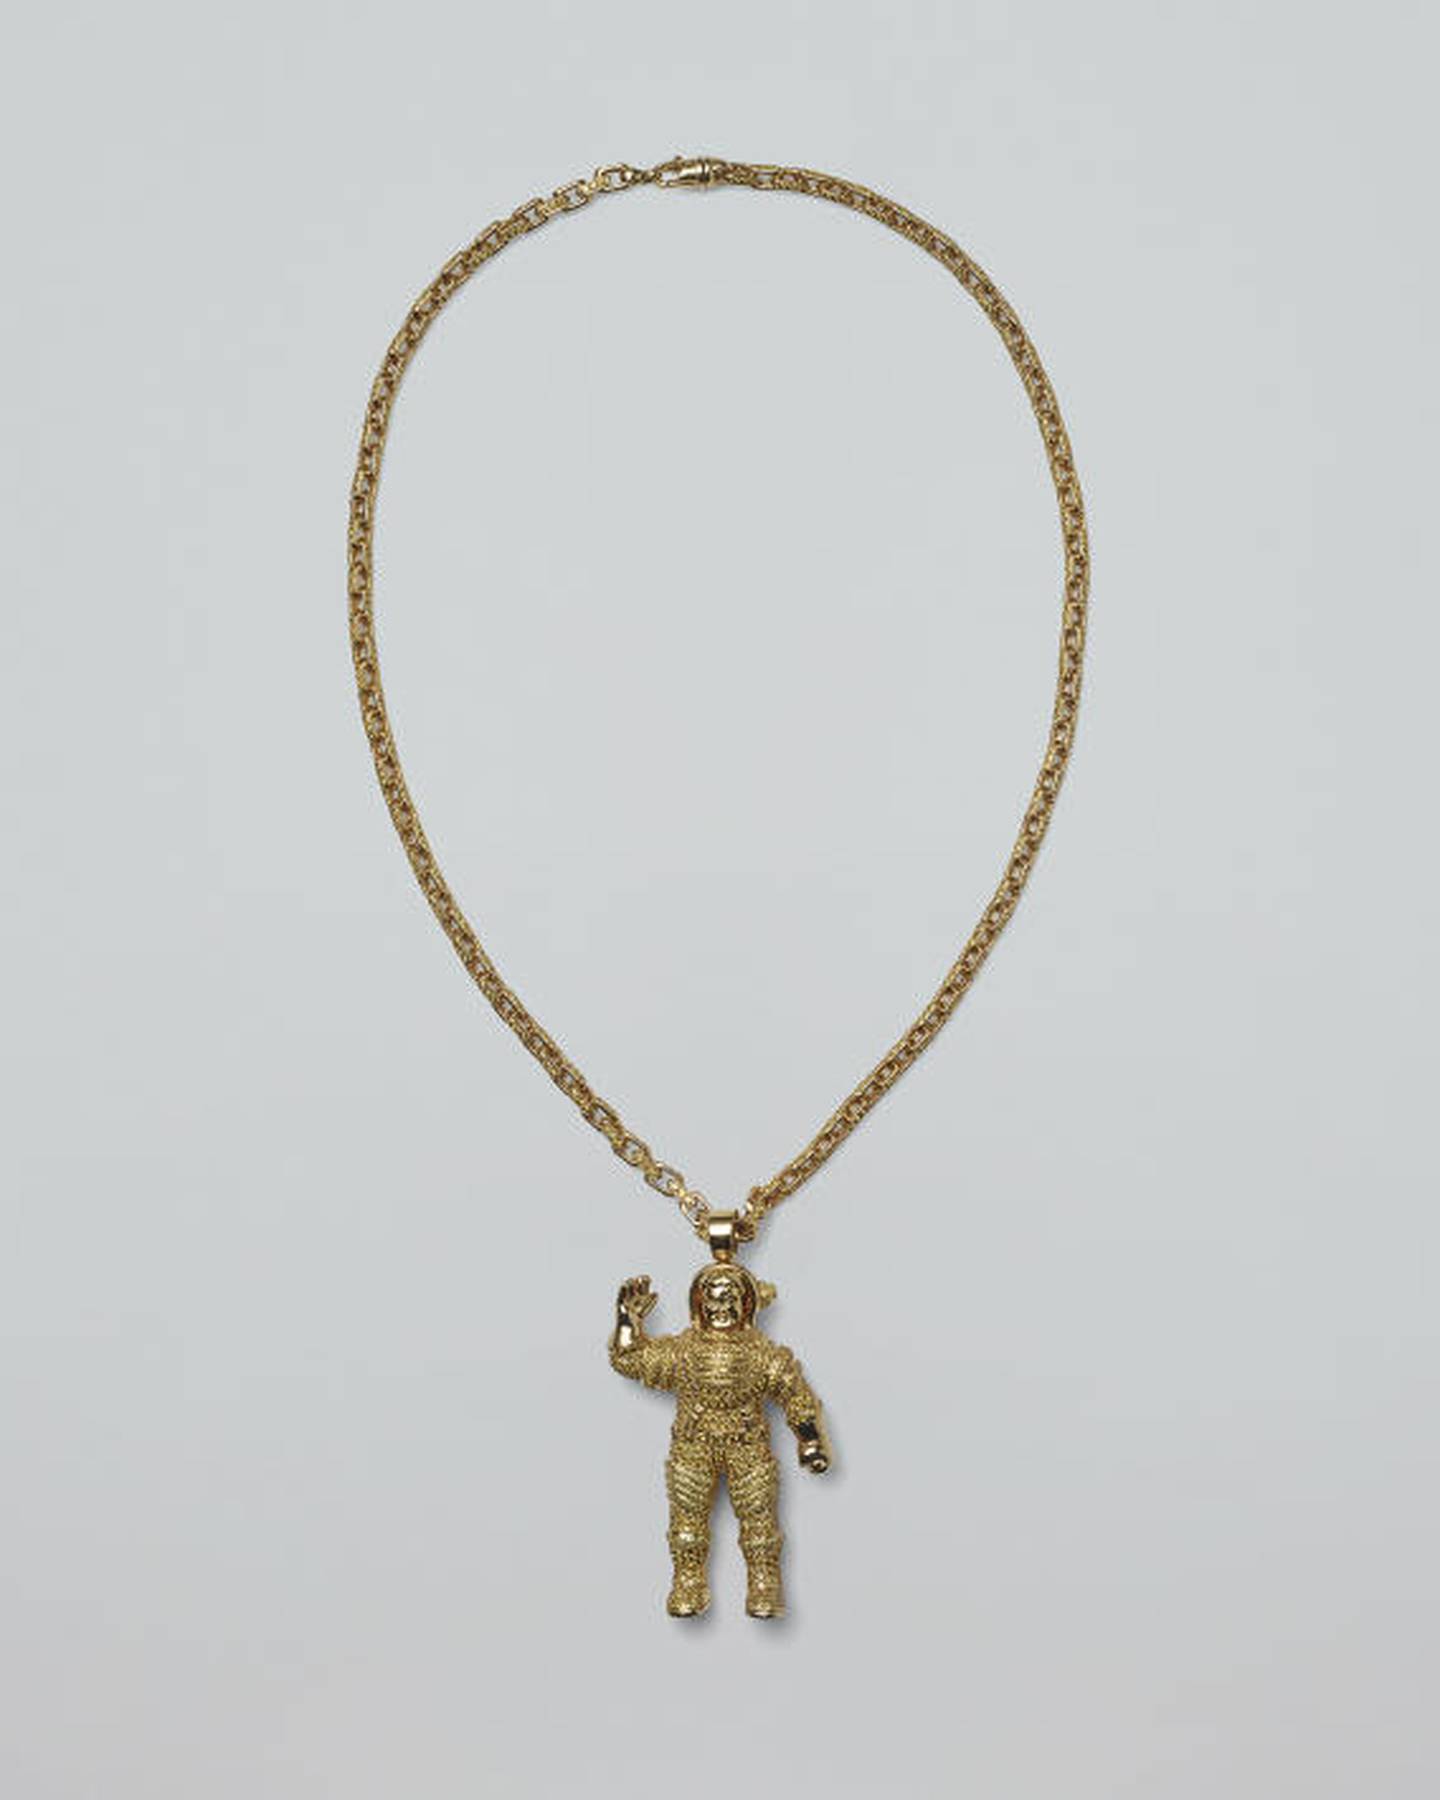 Gold Astronaut Pendant, $56,000 by Jacob & Co. Made for Pharrell Williams, worn to the Versace Spring 2004 Haute Couture Show. Photo: “Joopiter.”